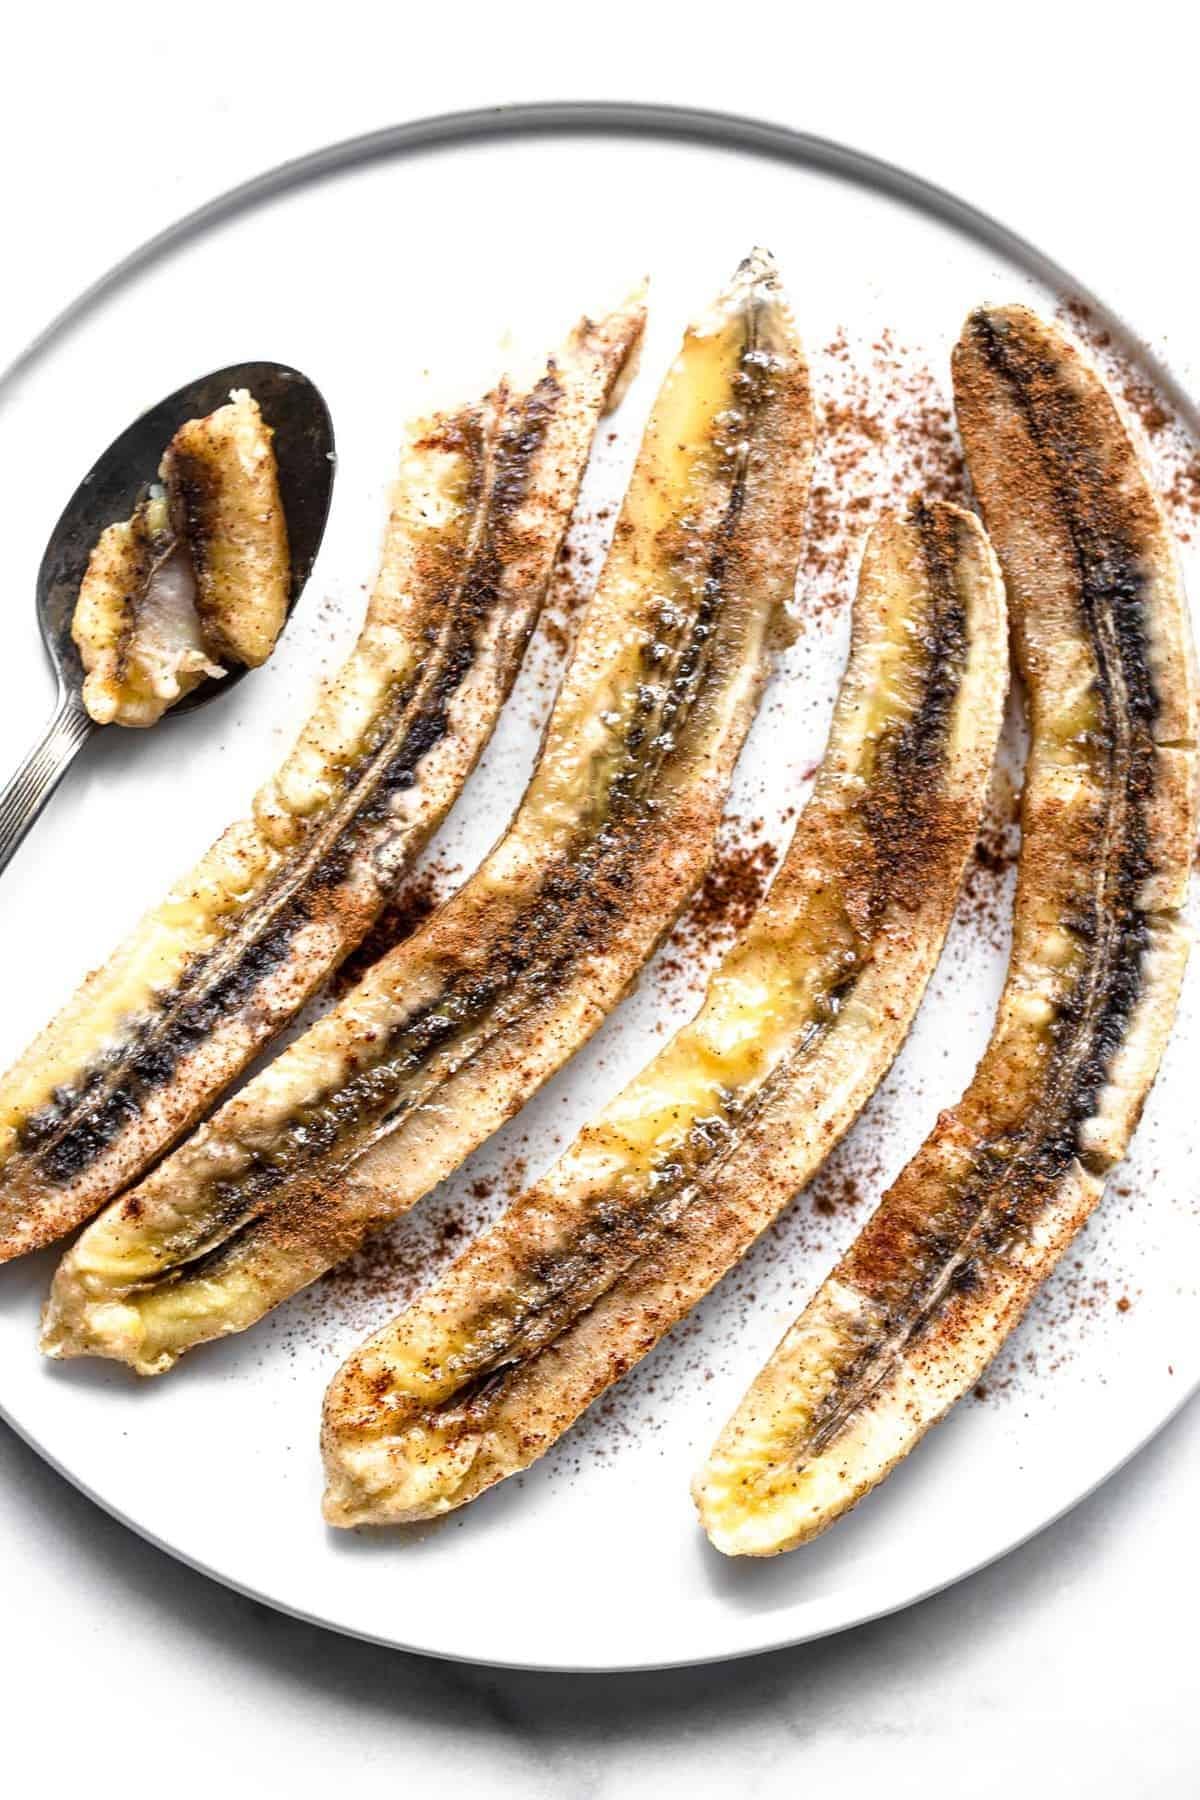 4 baked bananas on a plate with cinnamon on top